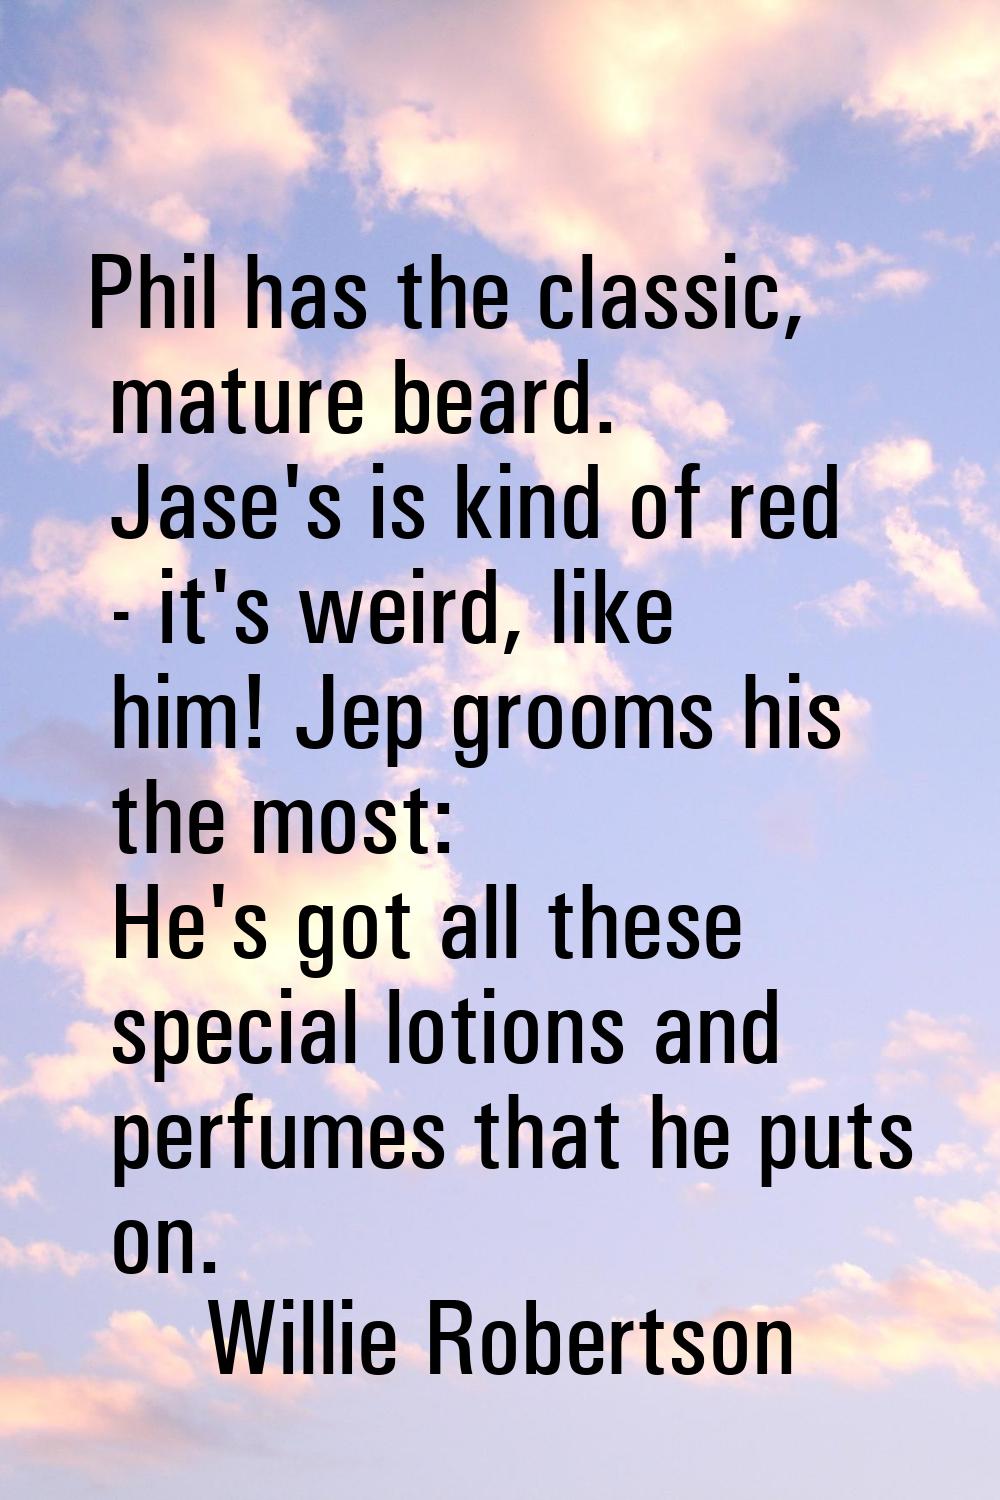 Phil has the classic, mature beard. Jase's is kind of red - it's weird, like him! Jep grooms his th